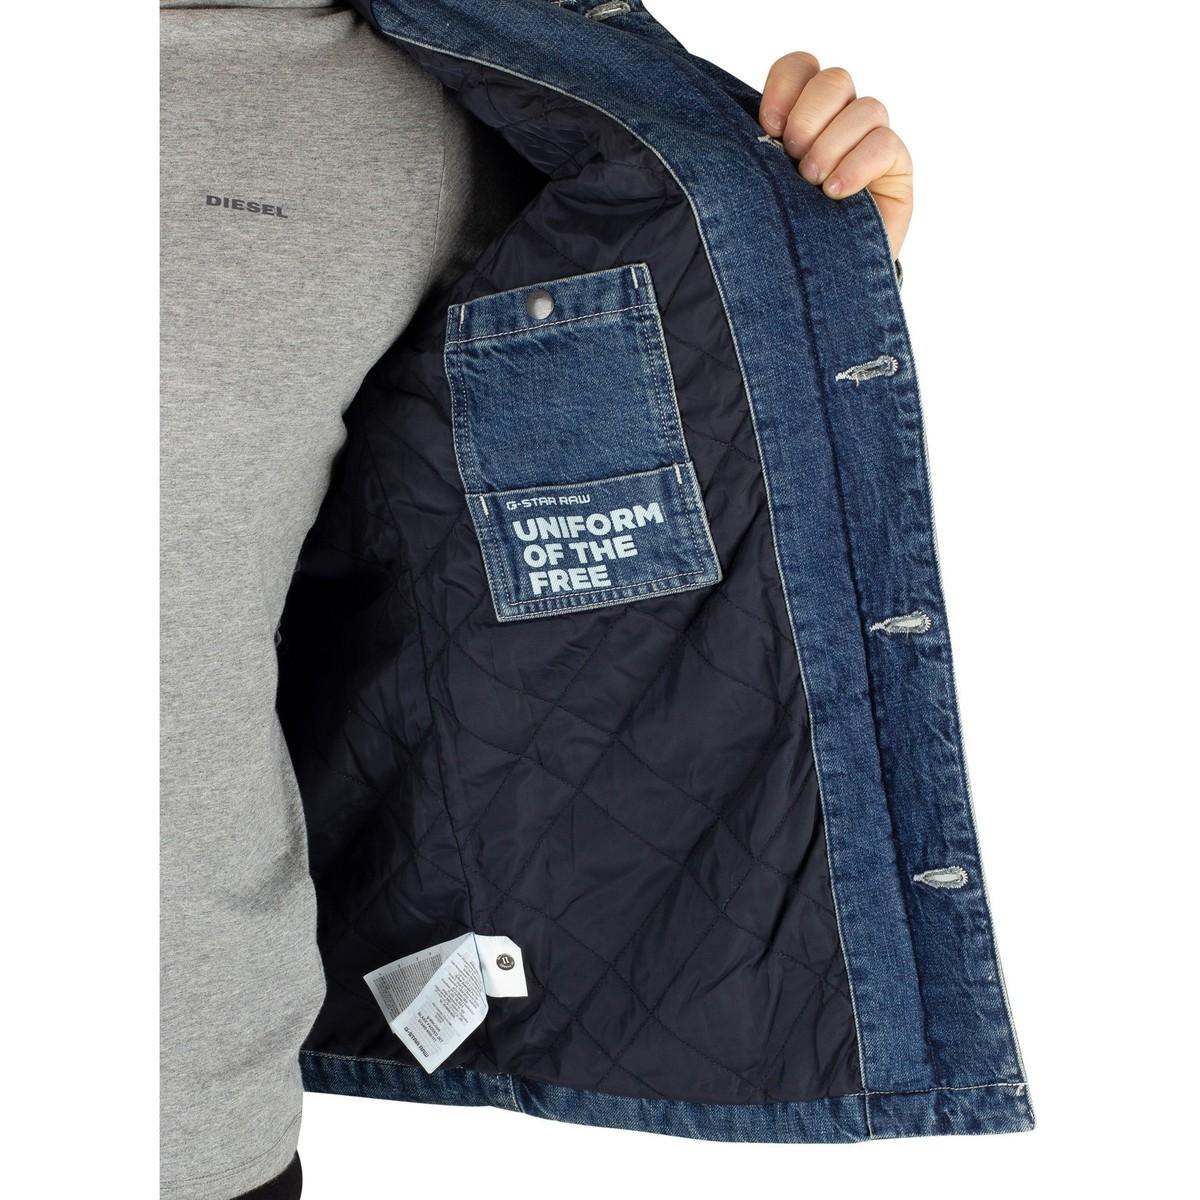 G-Star RAW Cotton Blake Padded Jacket in Blue for Men - Lyst